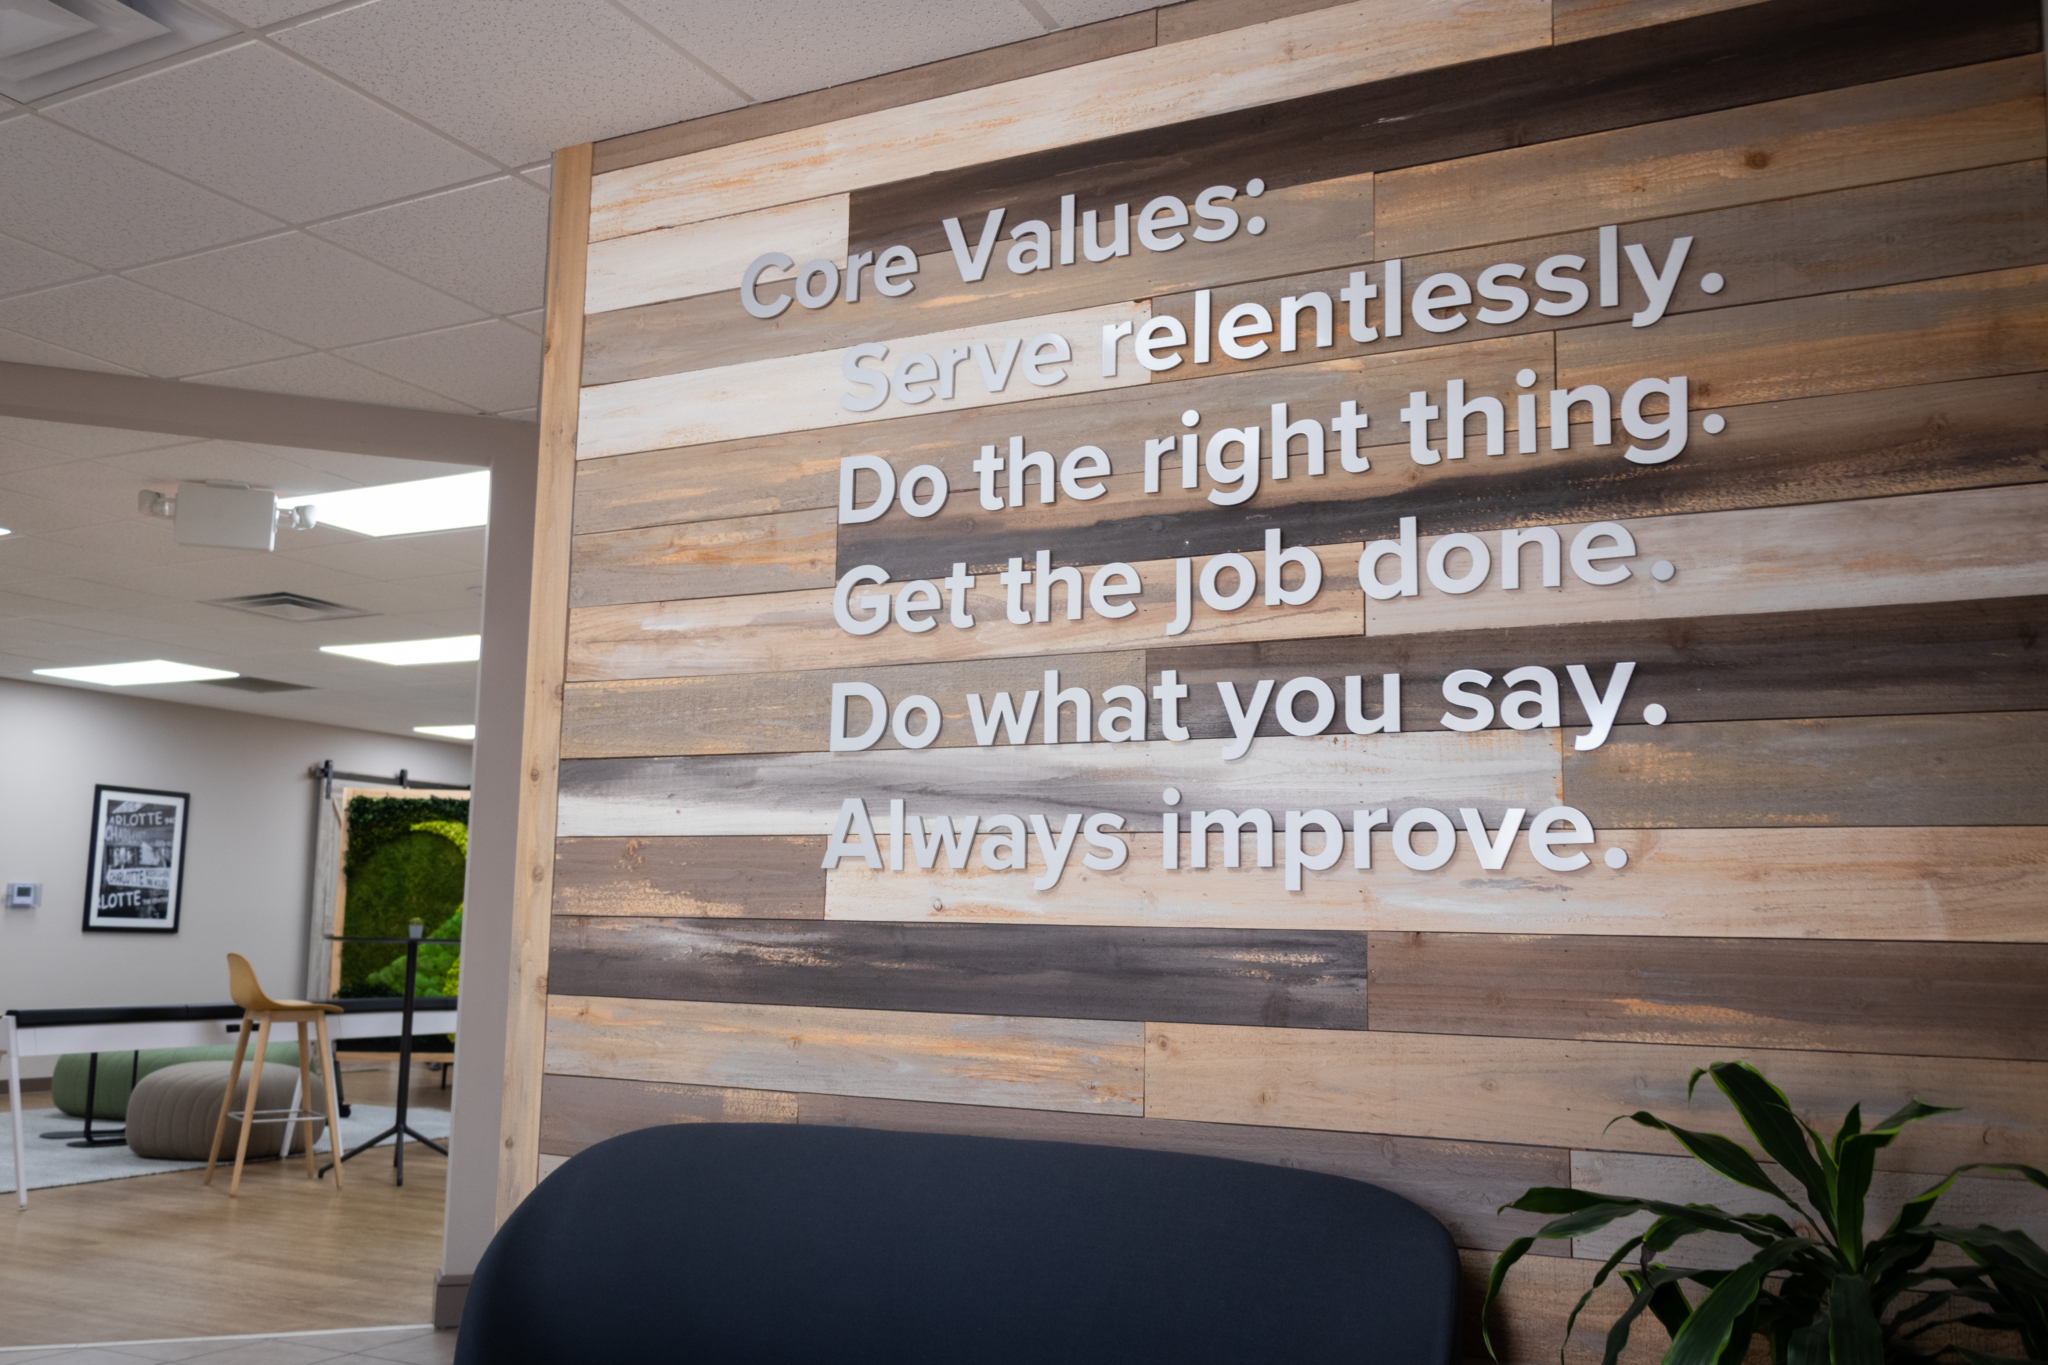 Workspace's core values on a sign